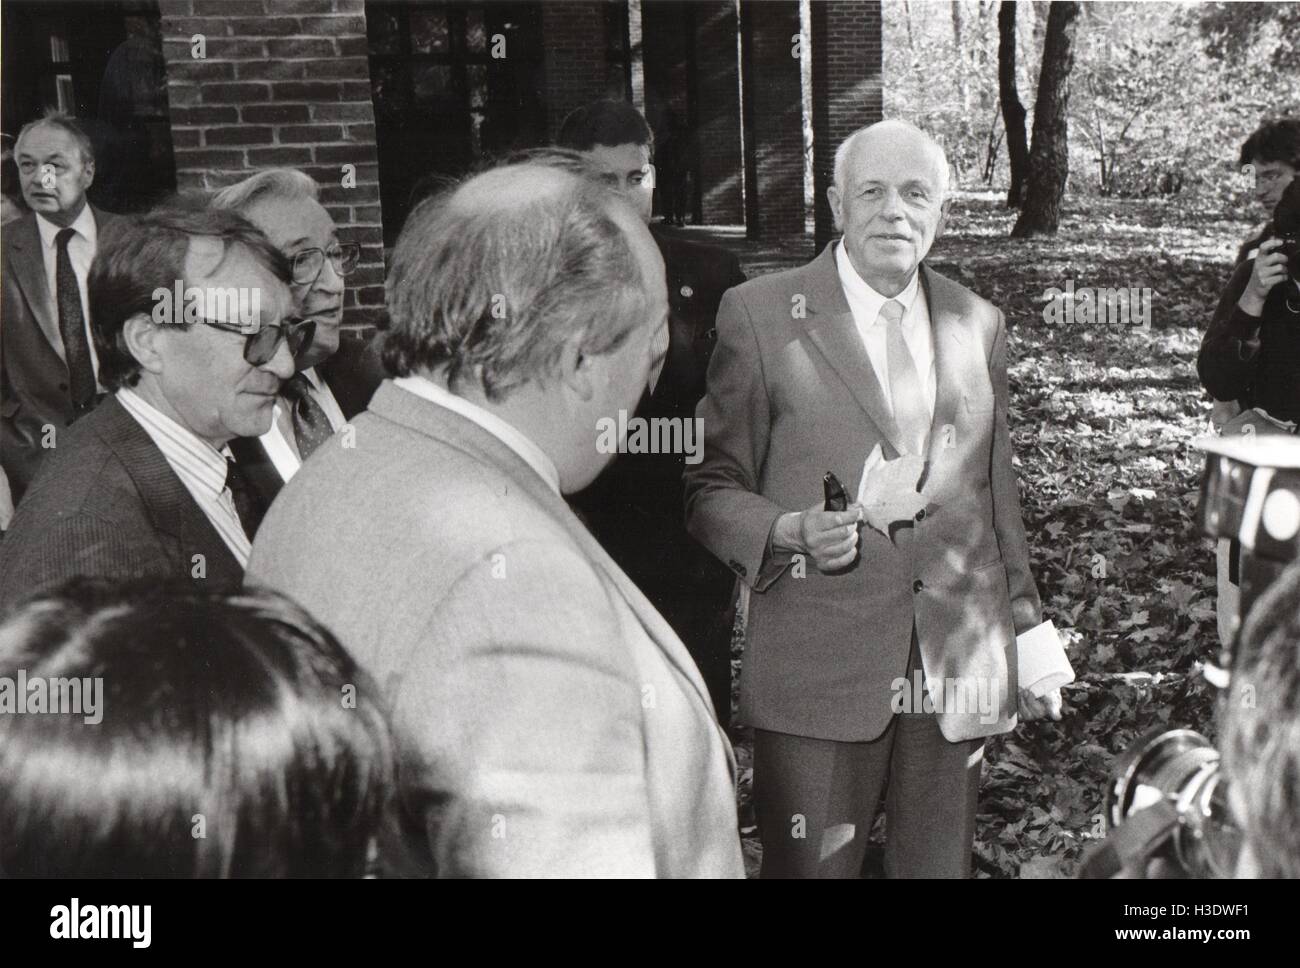 Somerville, Massachusetts, USA. 7th Nov, 1988. ANDRE SAKHAROV, dissident Soviet scientist, father of the Soviet hydrogen bomb, and Nobel winner, in his first press conference in the United States at the American Academy of Arts and Sciences in Somerville, Massachusetts. He spoke about, among other things, the political situation in the Soviet Union between the Armenians and Azerbaijanis and suggests that the government step in and stop the killing of Armenians in Azerbaijan. © Kenneth Martin/ZUMA Wire/Alamy Live News Stock Photo